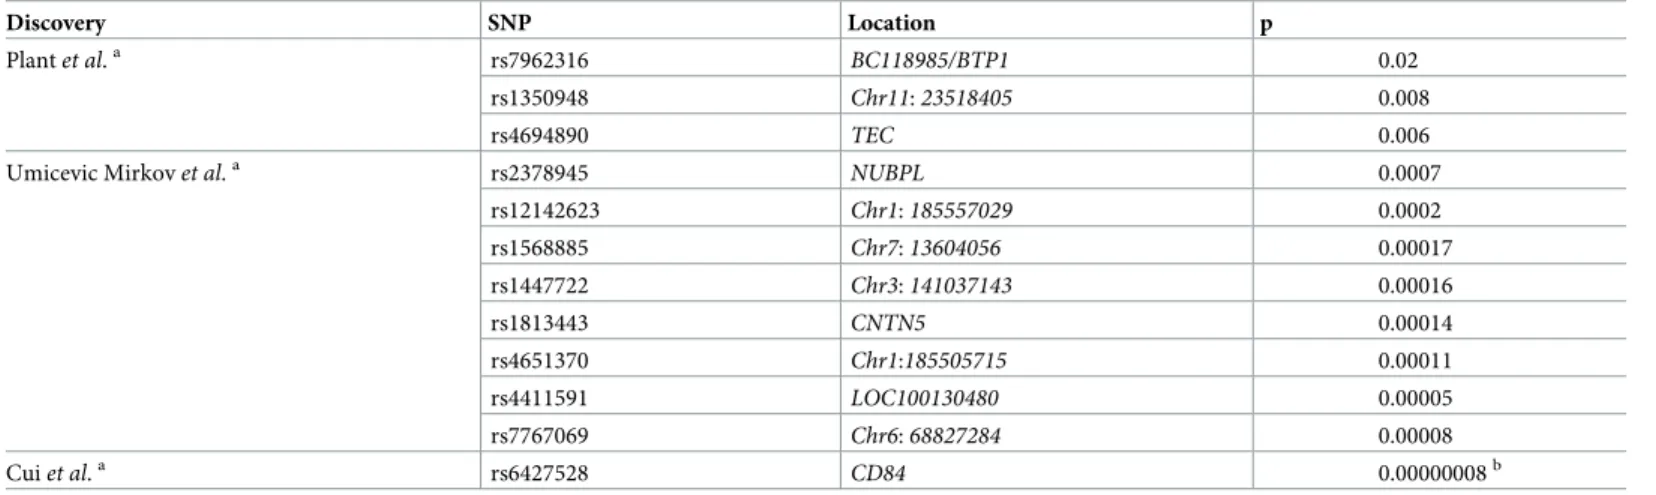 Table 2. SNPs associated with response to TNFi in RA GWAS selected for this study.